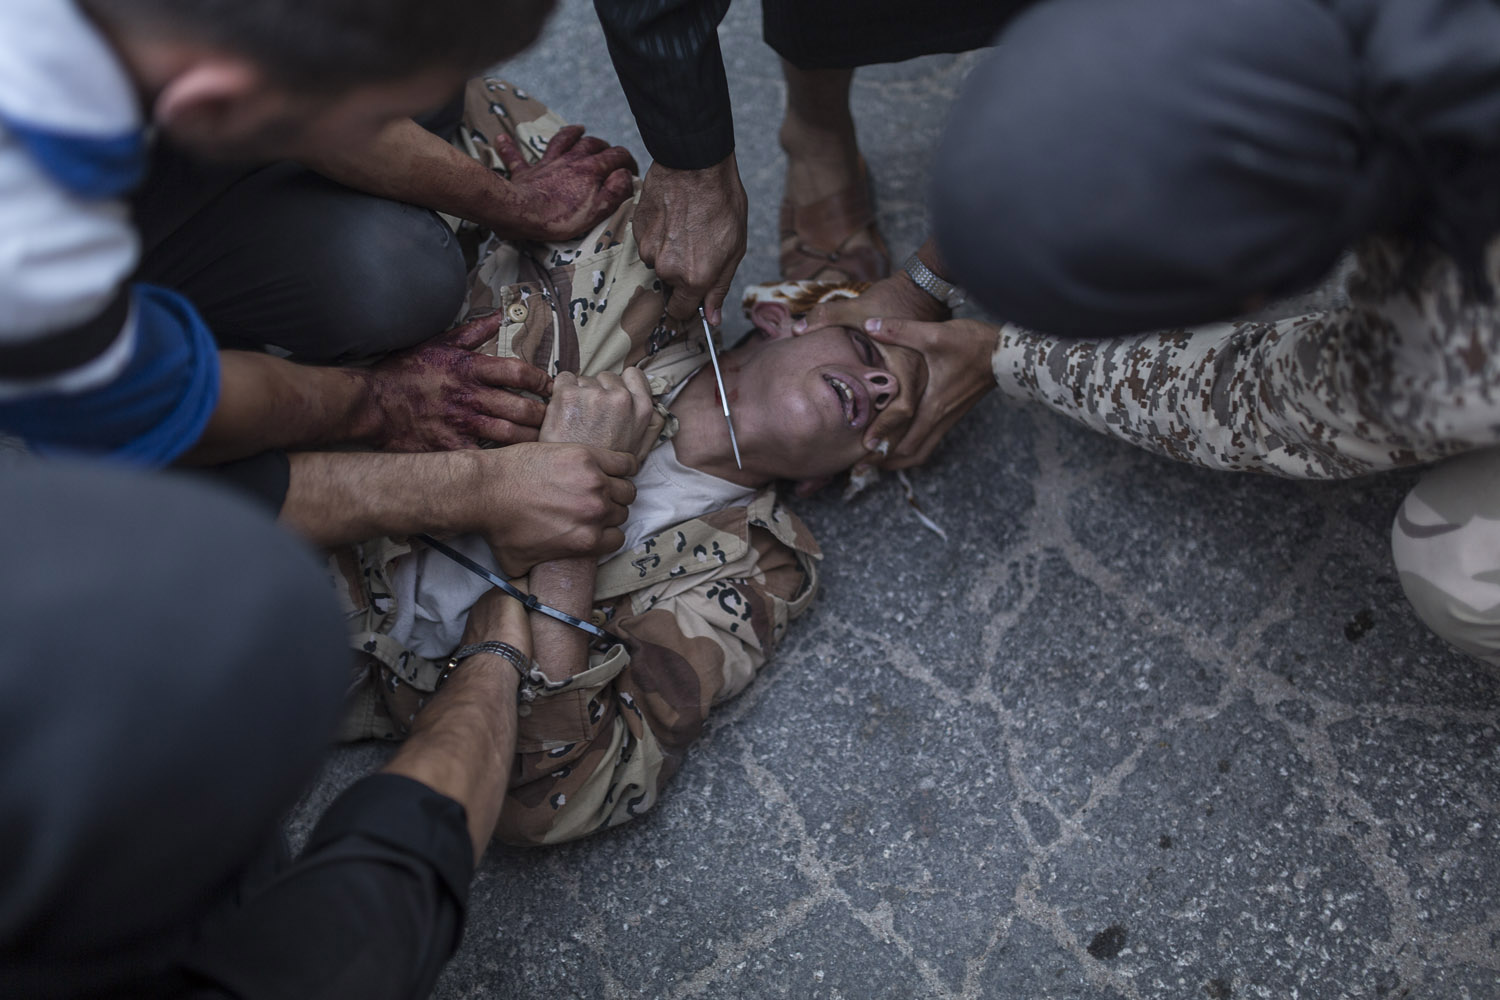 Aug. 31, 2013. A young Syrian man is executed by ant-regime rebels in the town of Keferghan, near Aleppo.